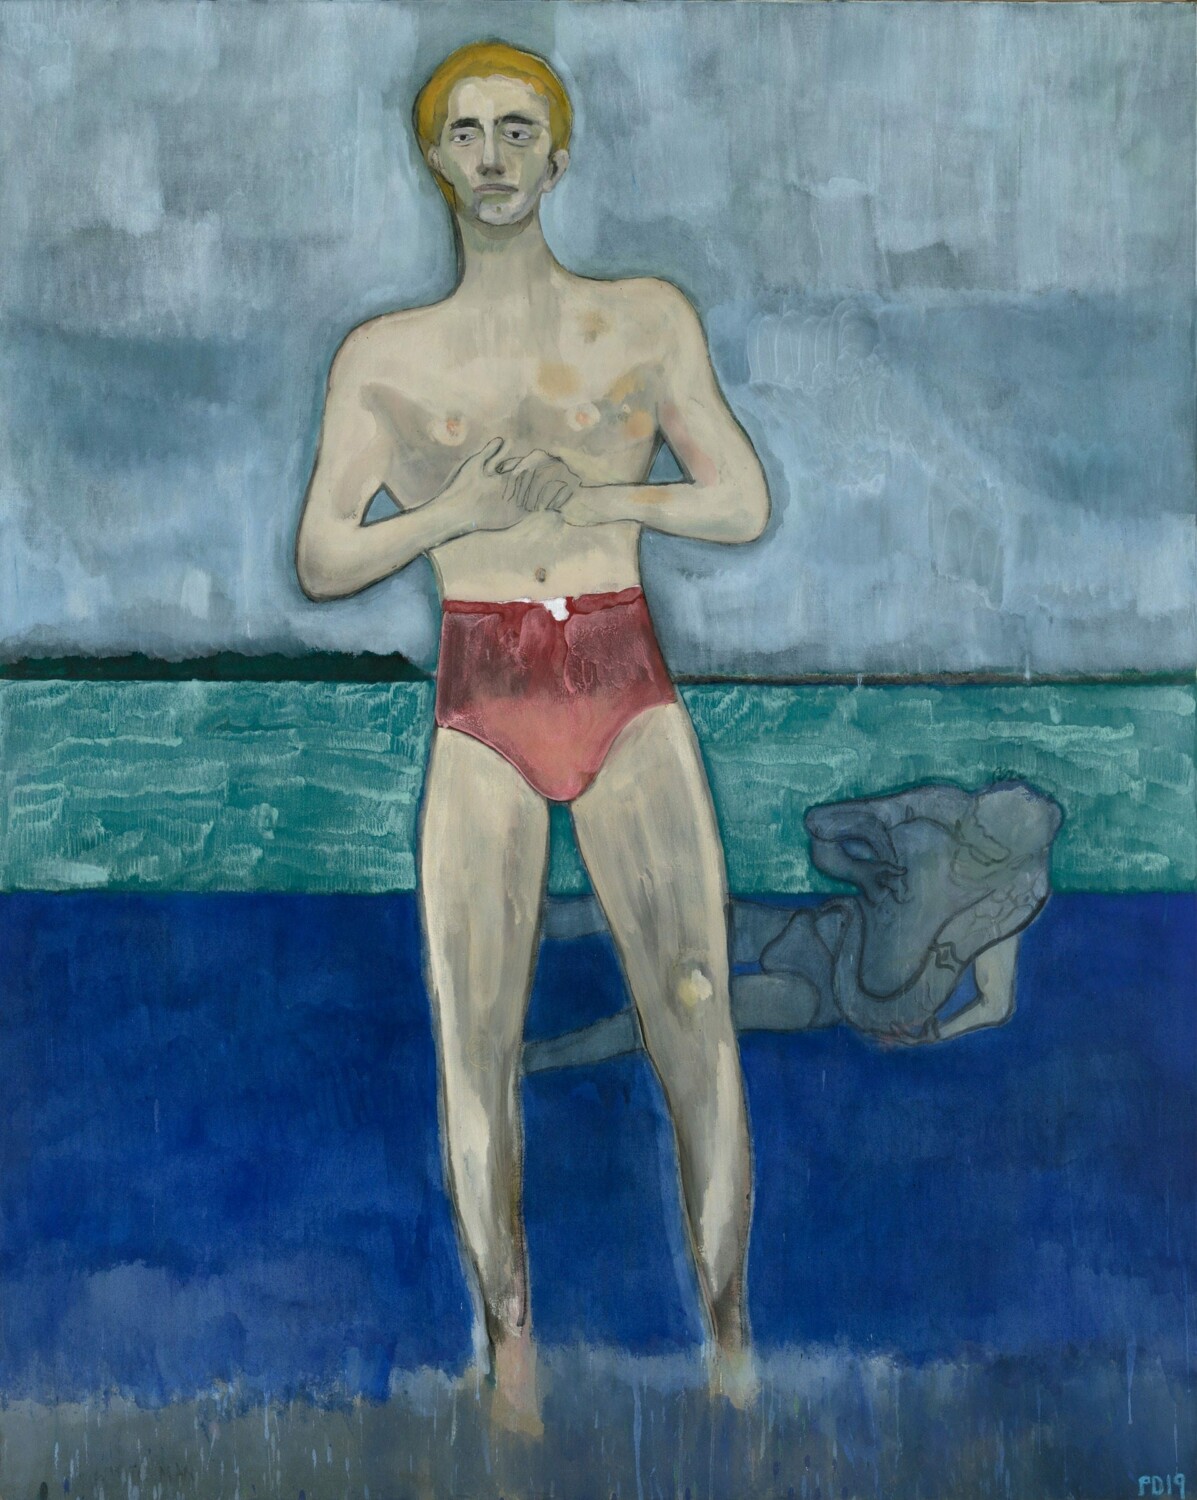 Peter Doig, Bather (Sings Calypso), 2019. Dispersion on linen, 98 1/2 x 78 3/4 inches (250 x 200 cm).